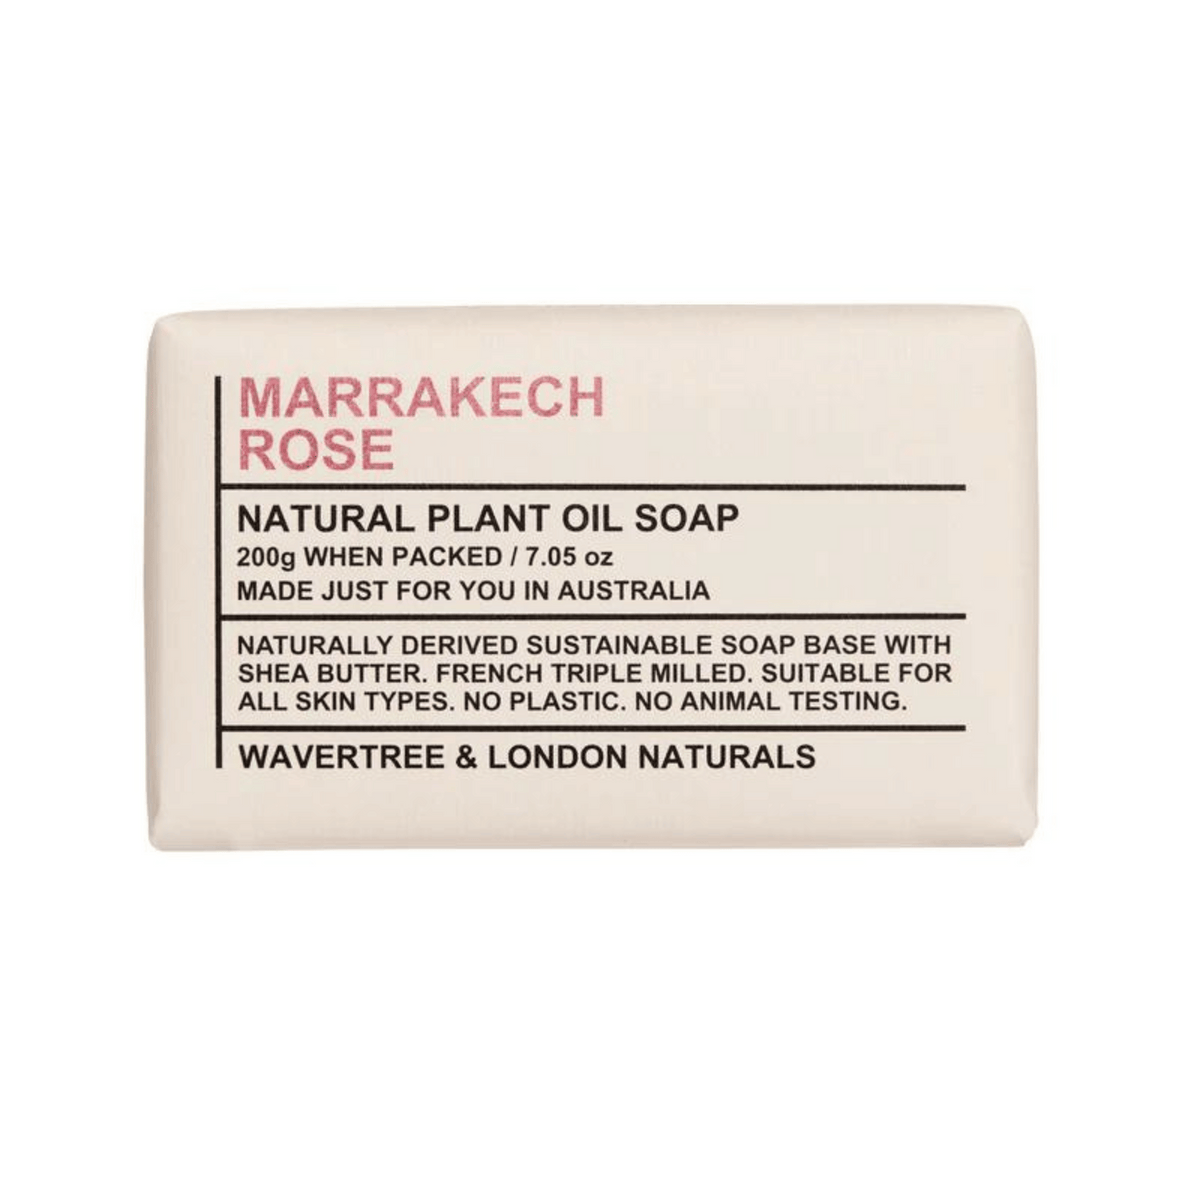 Primary Image of Marrakech Rose Soap Bar